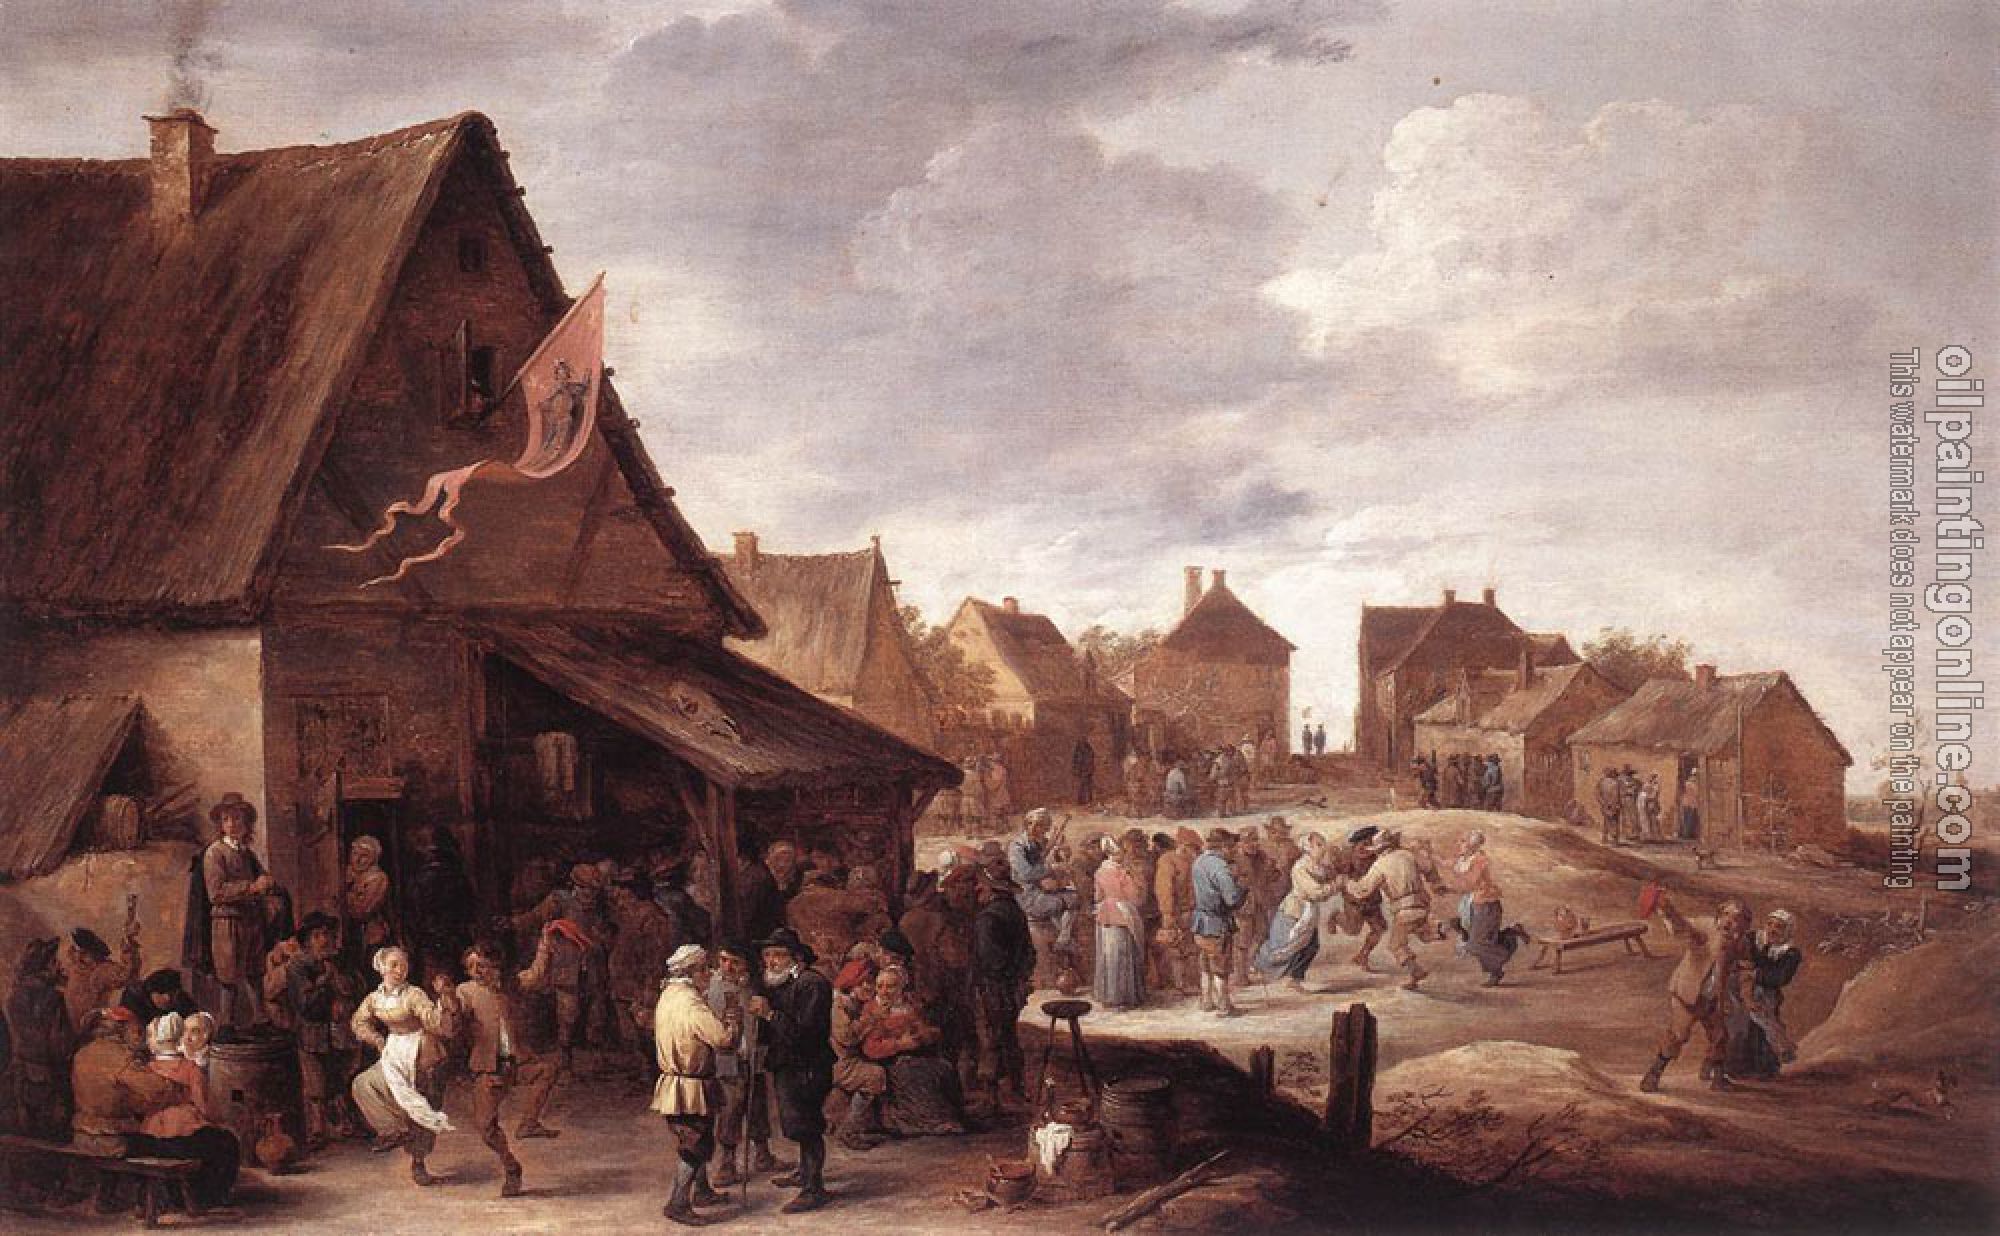 David Teniers the Younger - Village Feast